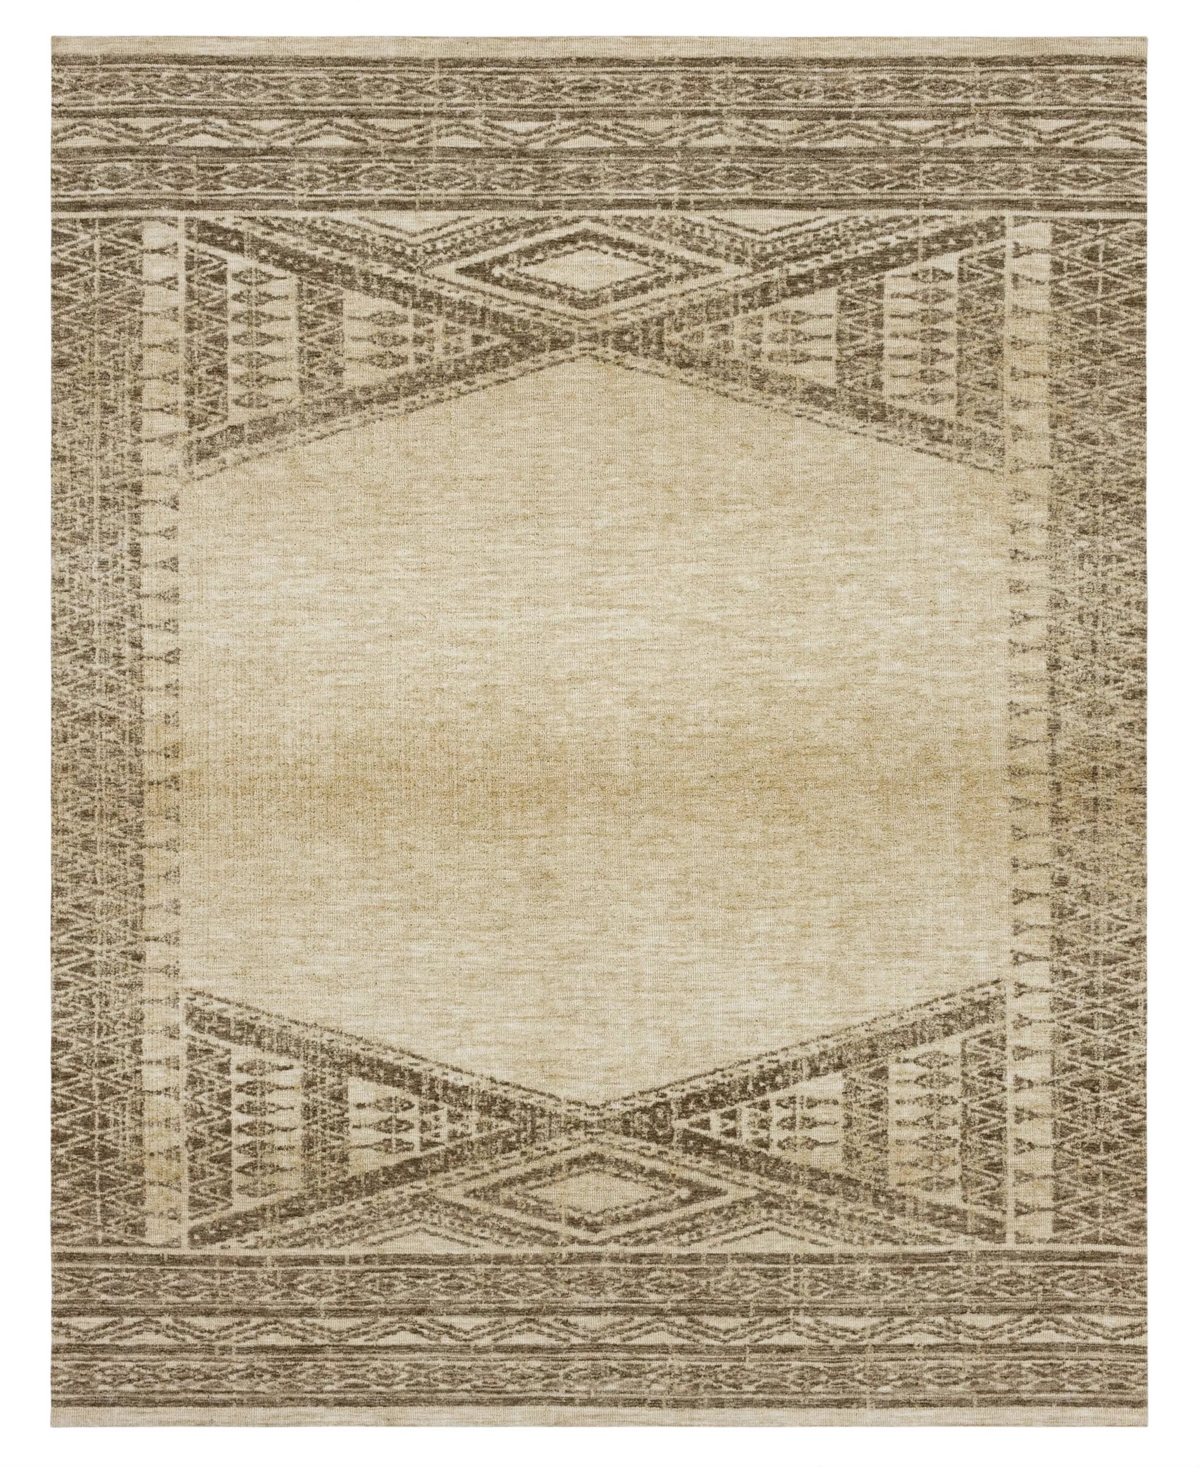 Drew & Jonathan Home Bowen Reverb 5'3" X 7'10" Area Rug In Neutral